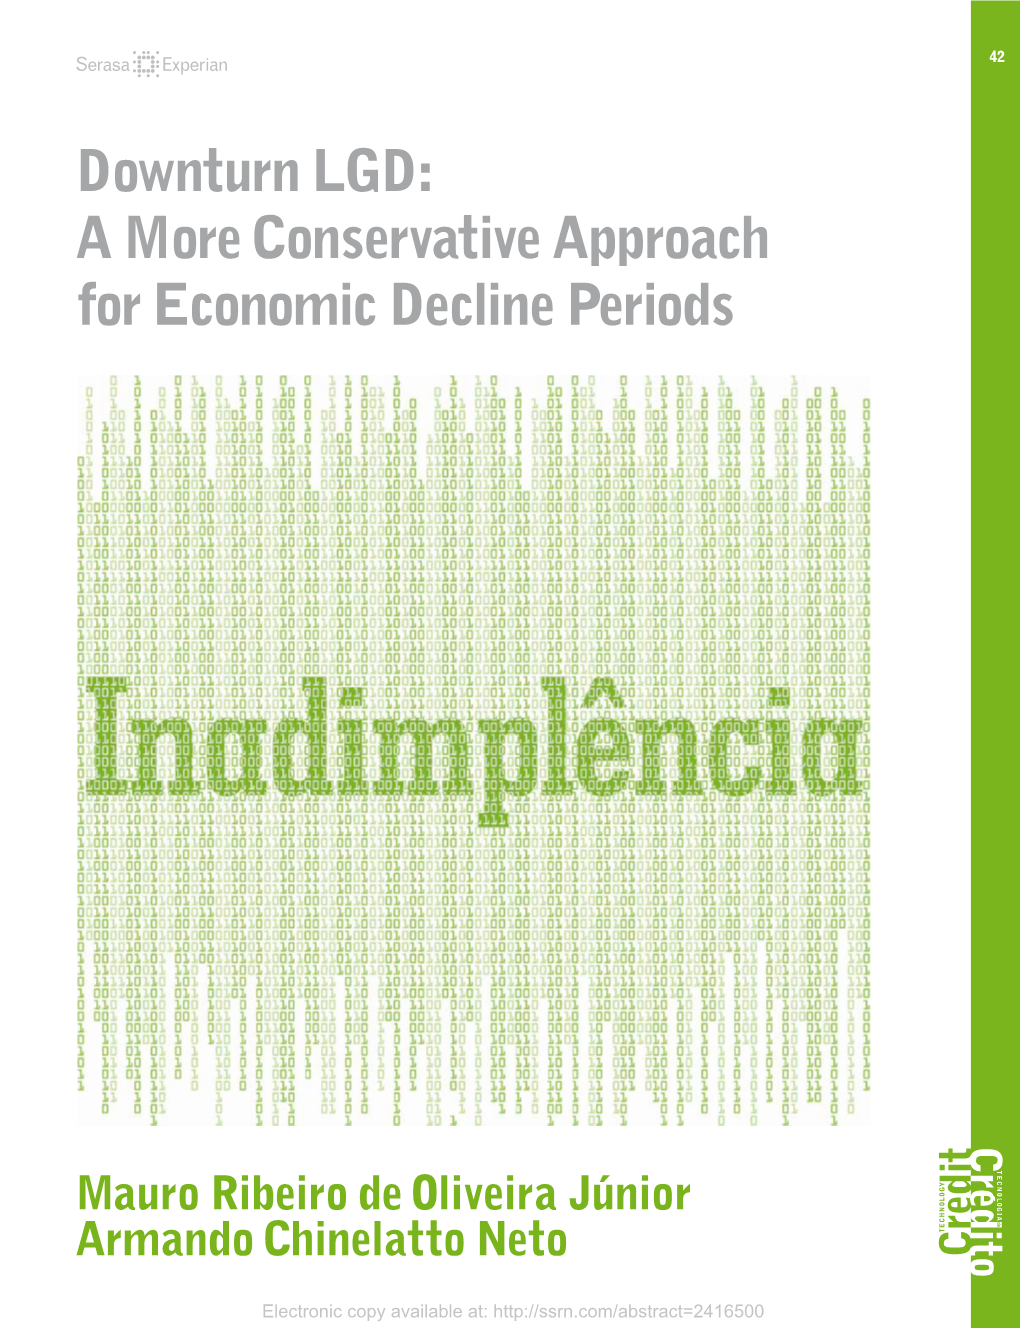 Downturn LGD: a More Conservative Approach for Economic Decline Periods